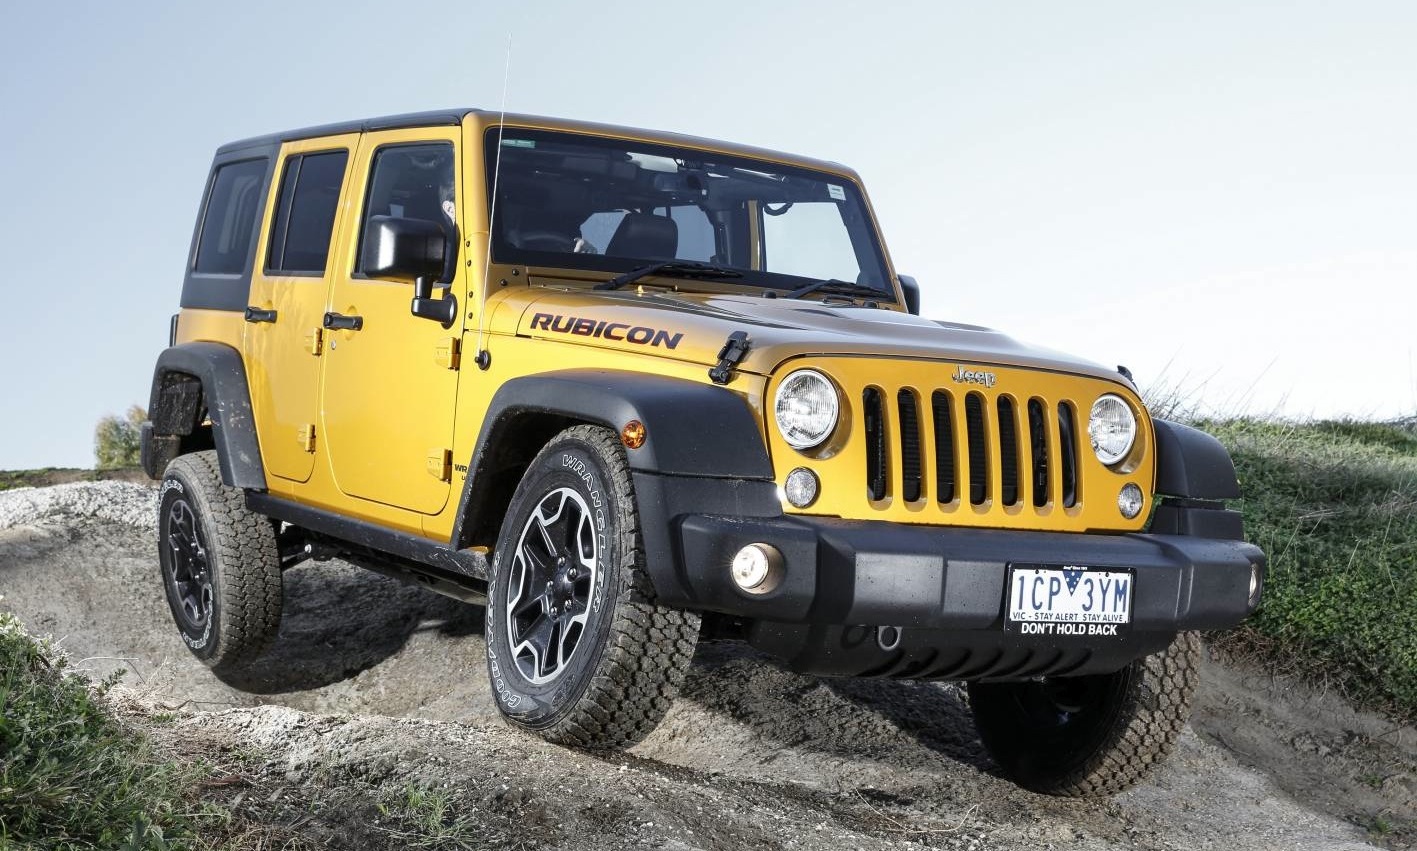 Jeep Wrangler Rubicon X on sale in Australia from $52,000